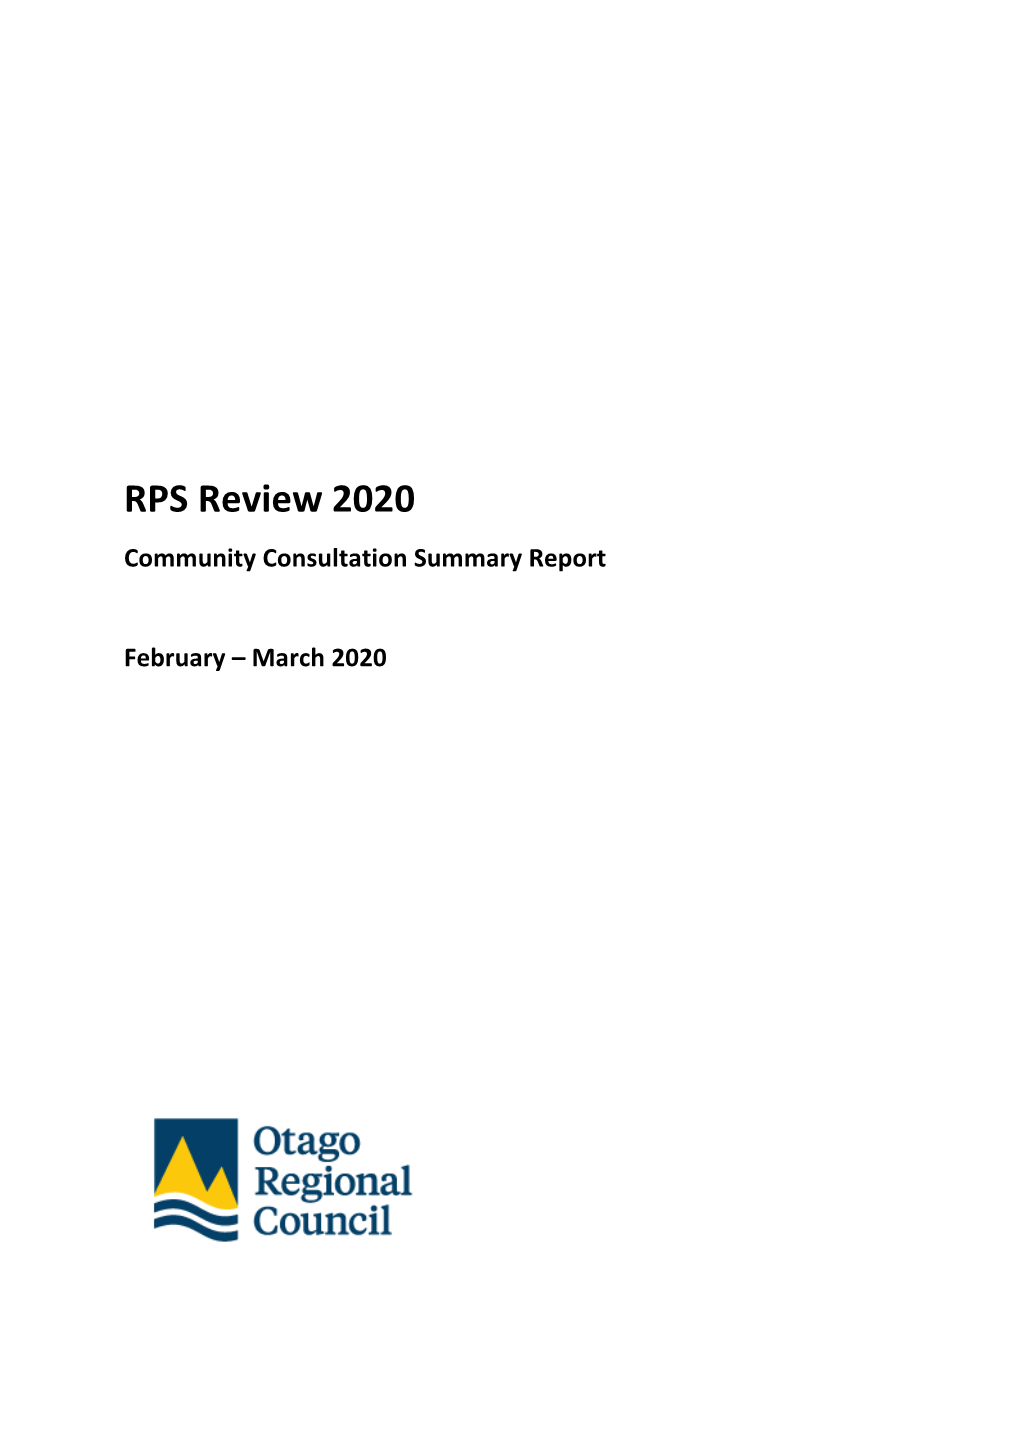 RPS Review 2020 Community Consultation Summary Report